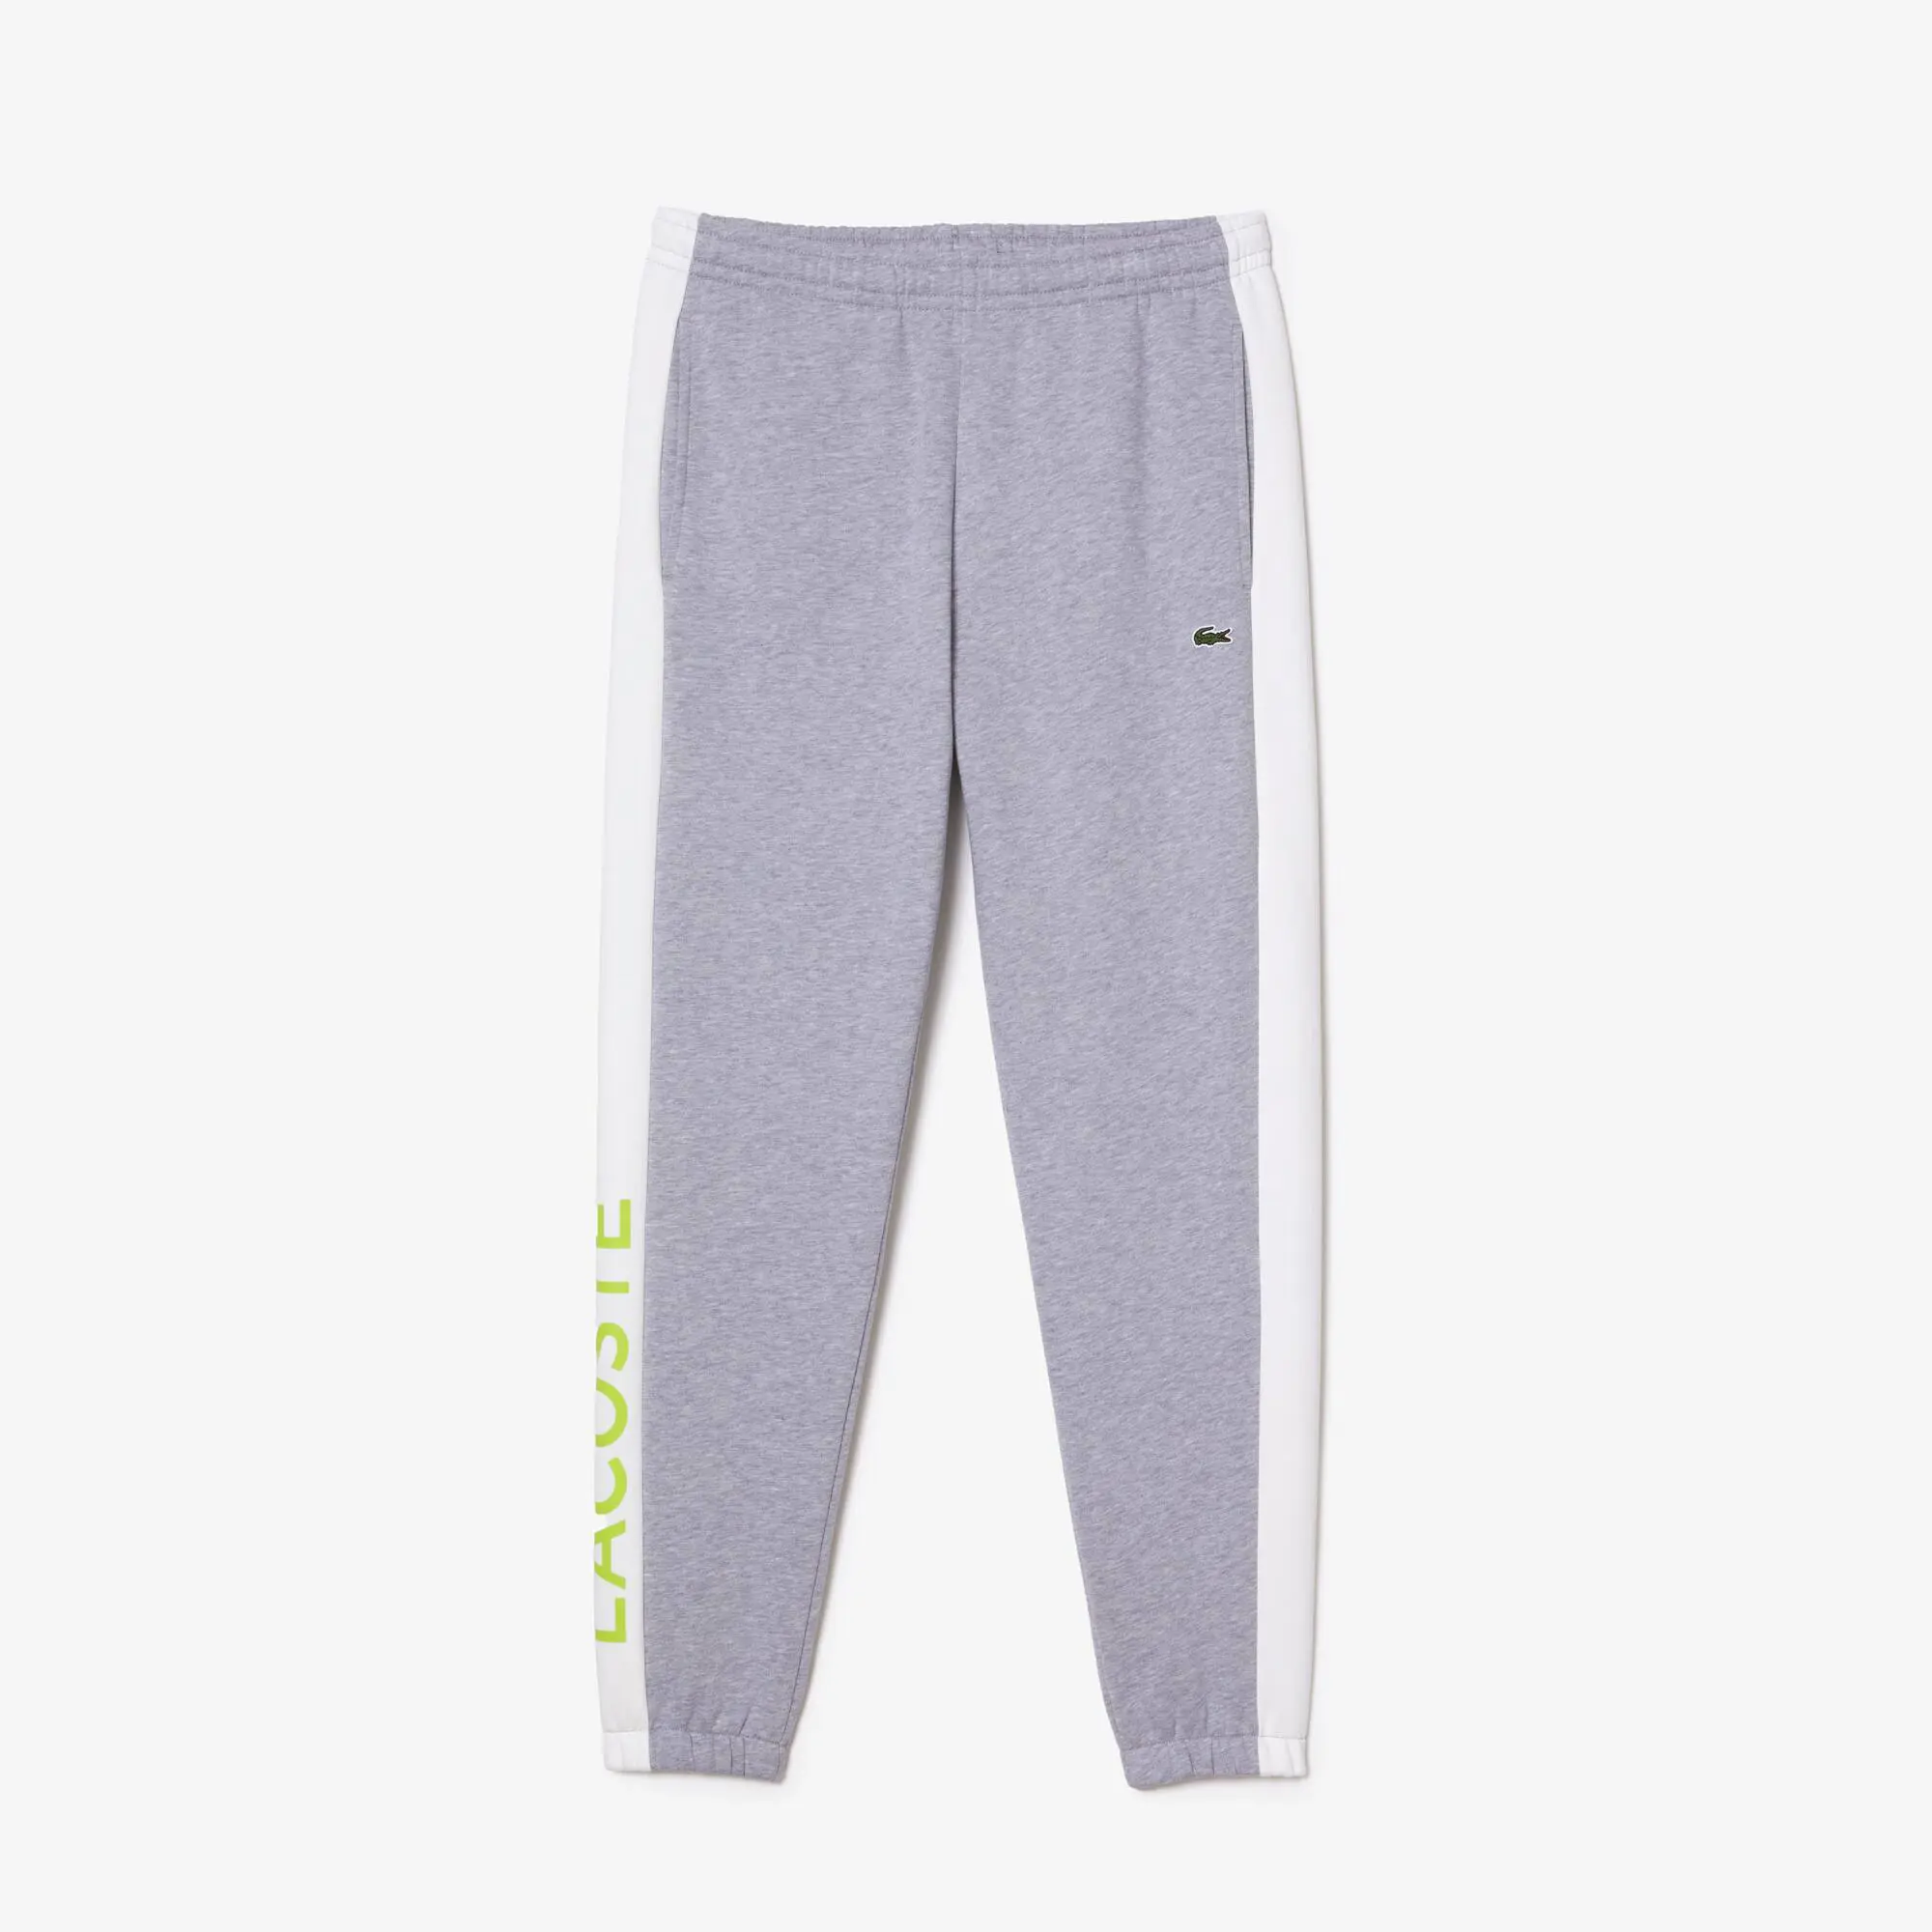 Lacoste Men’s Track Pants with Branding and Contrast Stripe Detail. 2